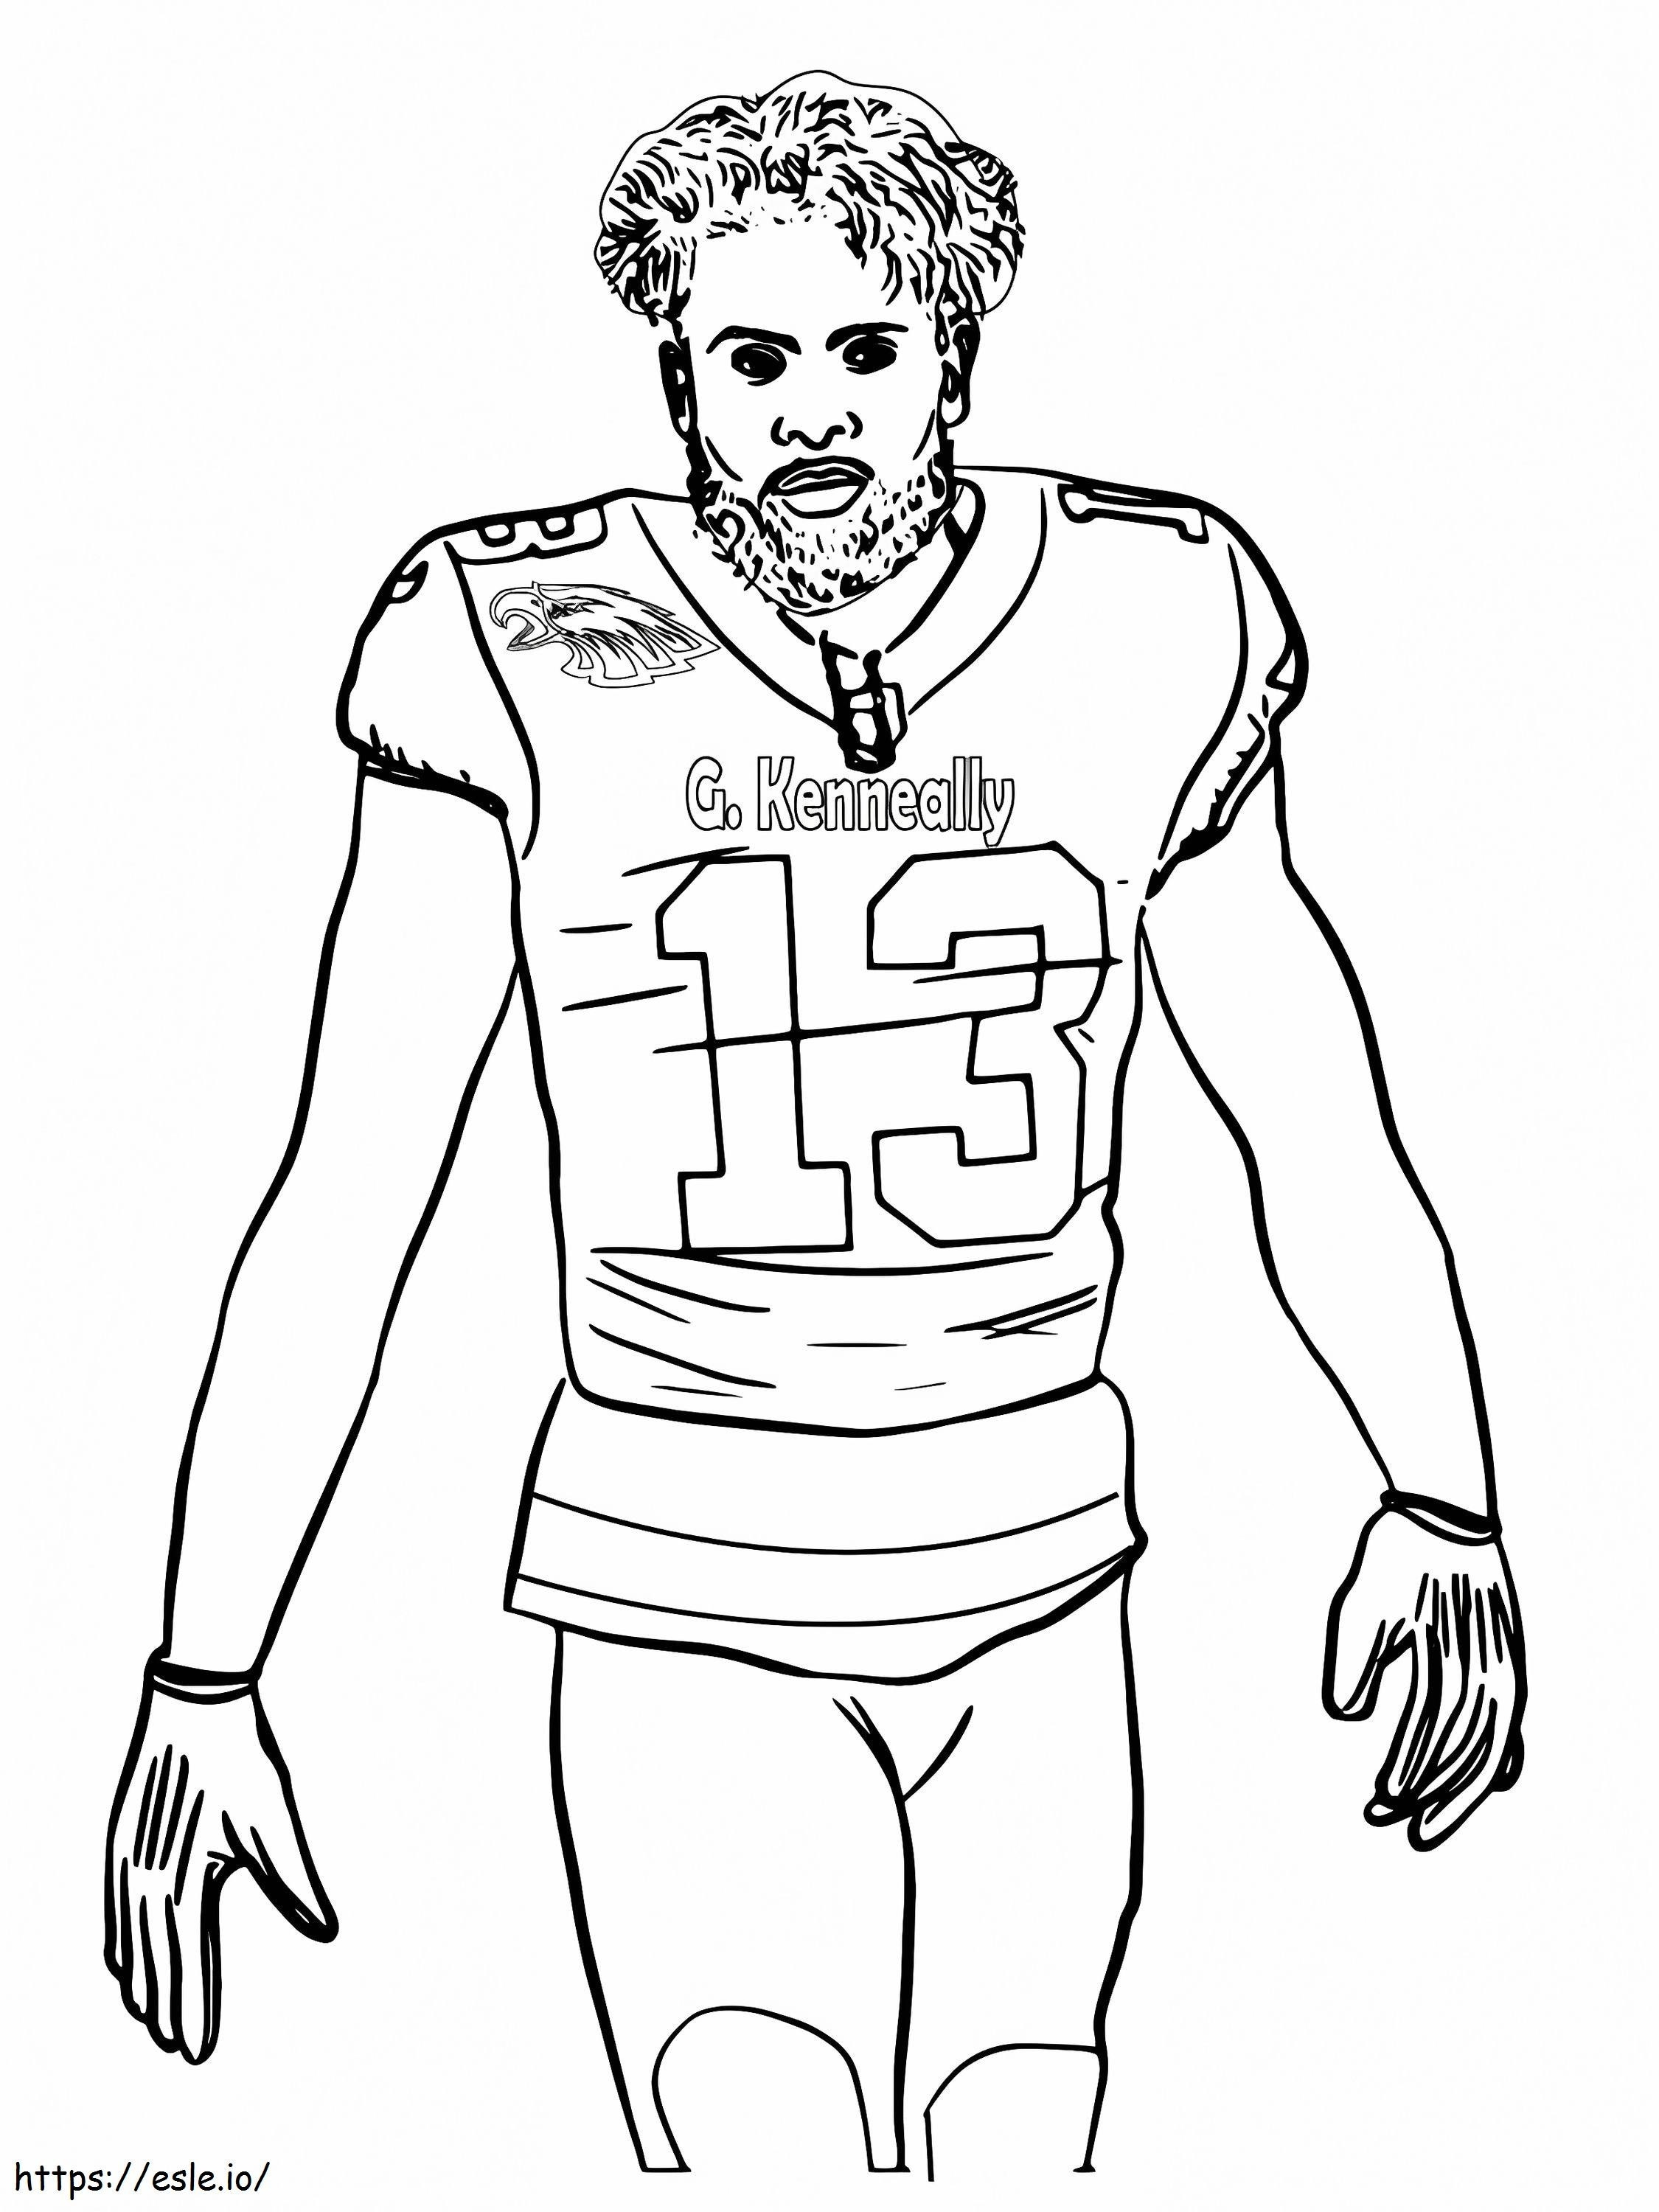 Philadelphia Eagles George Kenneally coloring page